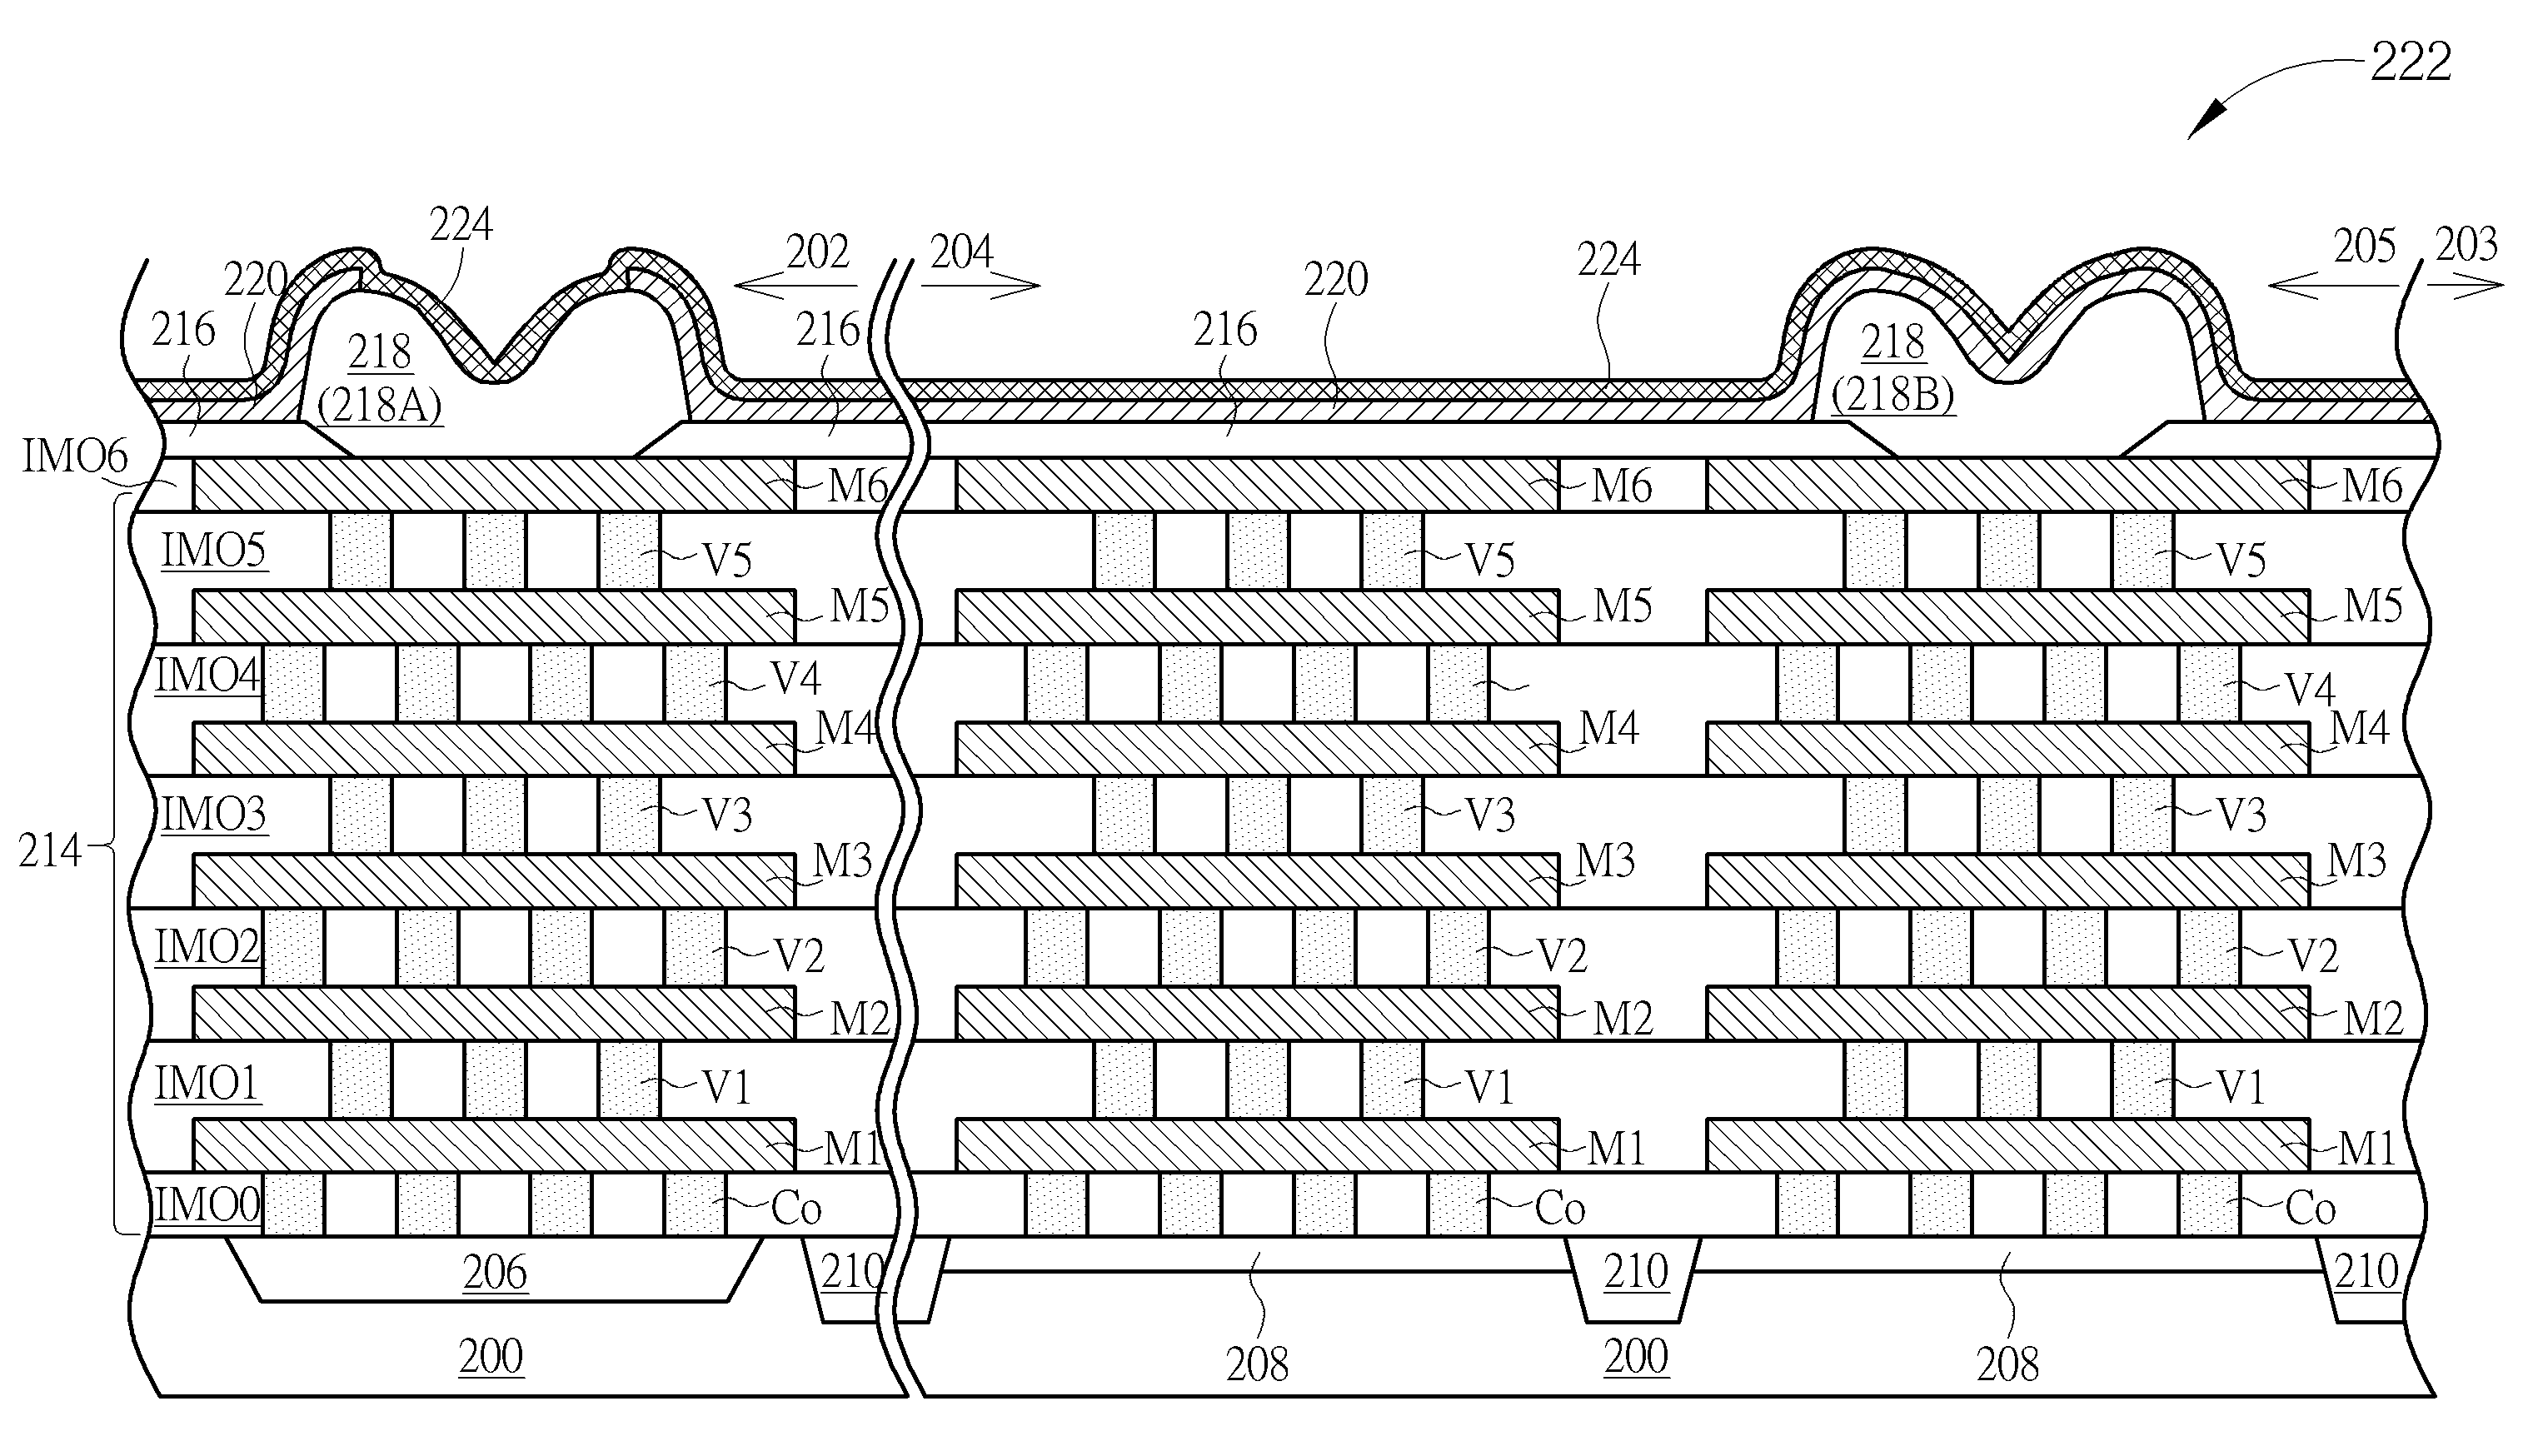 Seal ring structure and method of forming the same